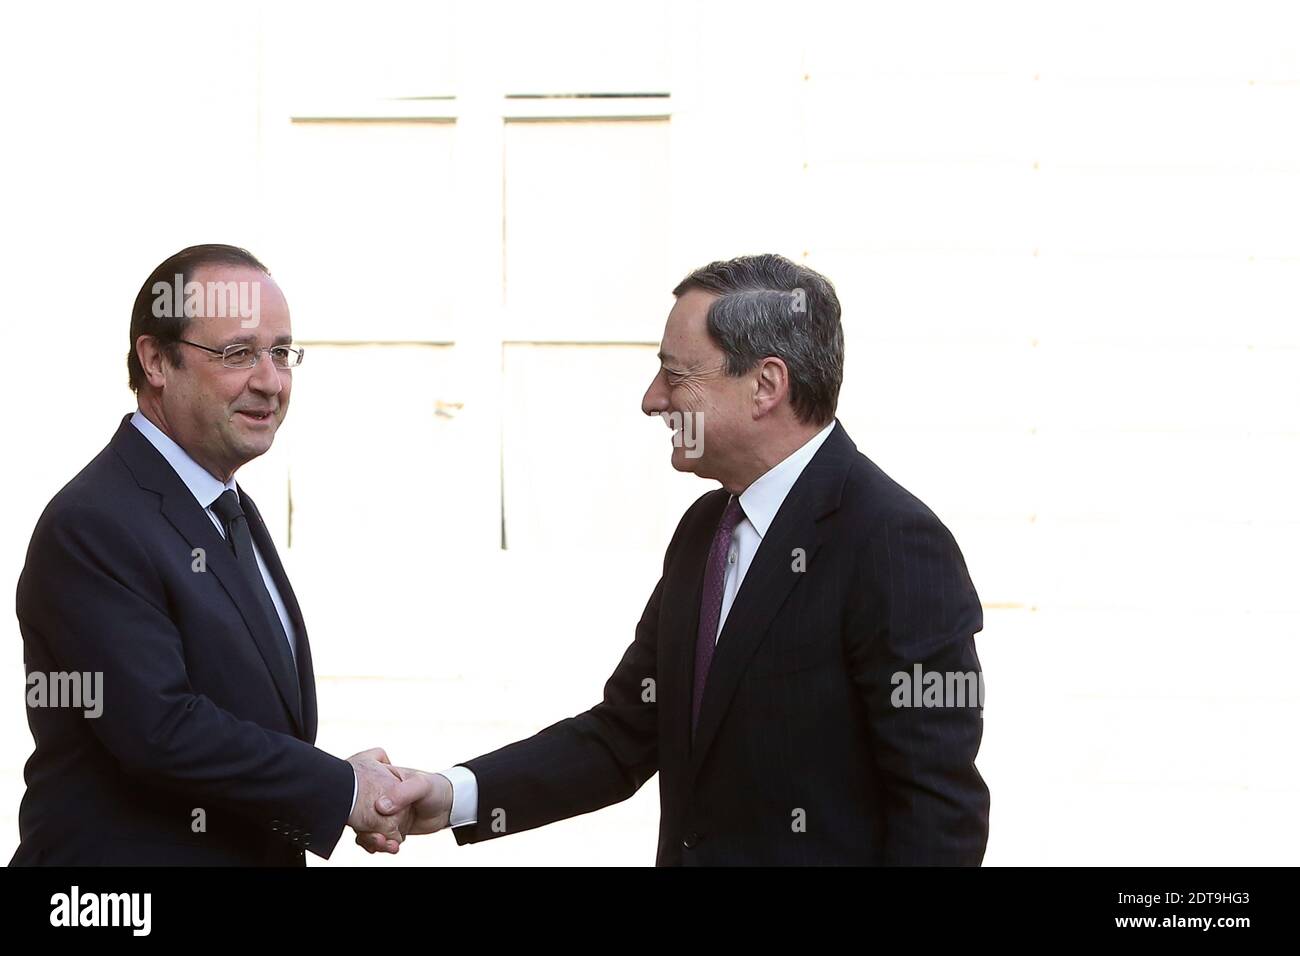 President Francois Hollande greets European central bank president Mario Draghi prior to a working breakfast at the Elysee palace, in Paris, France, on March 26, 2014. Photo by Stephane Lemouton/ABACAPRESS.COM Stock Photo